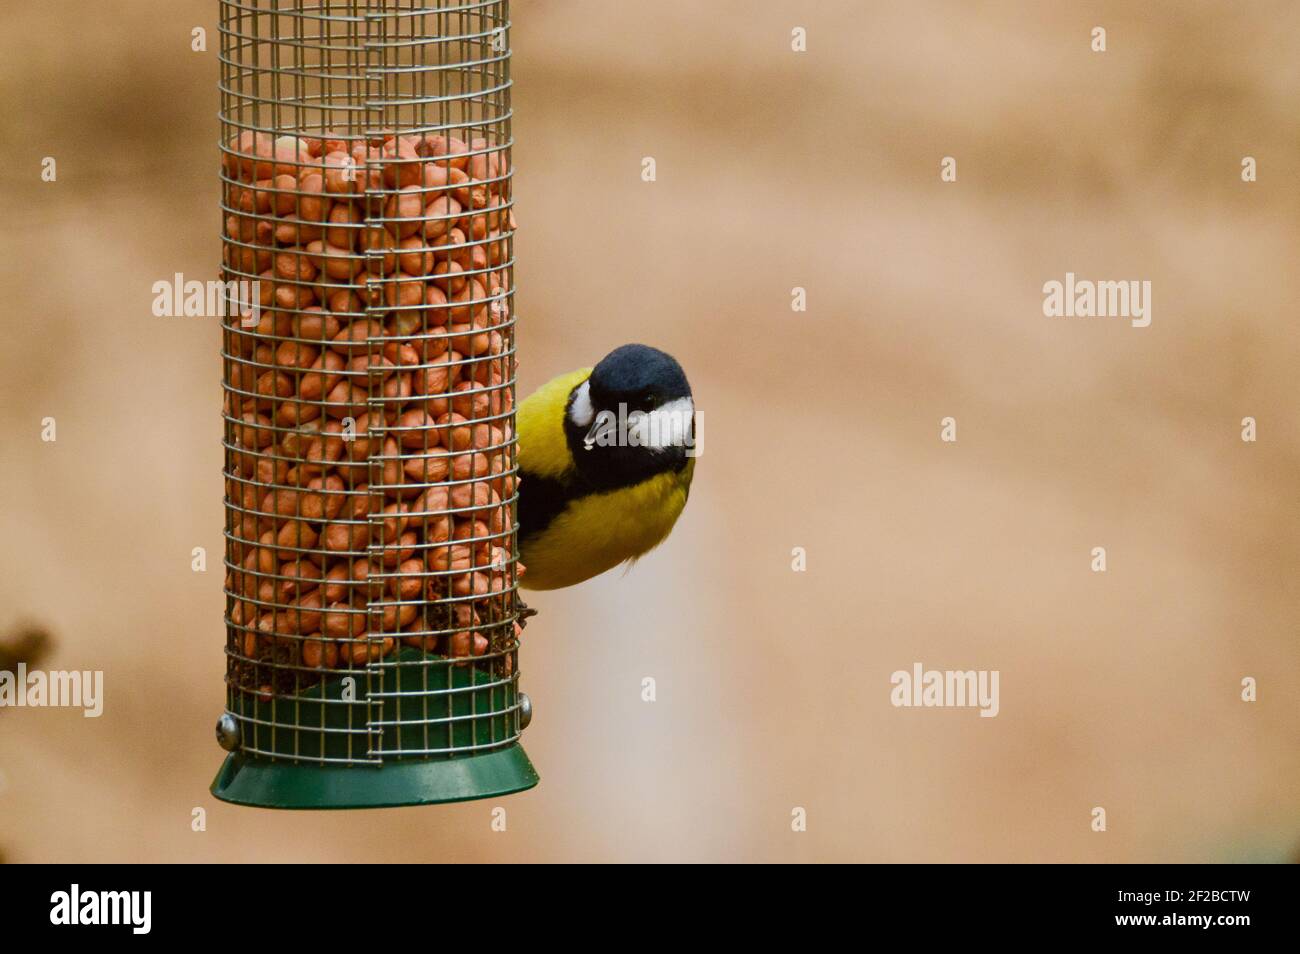 Great Tit (Parus Major) Eating Nuts from a Bird Feeder Stock Photo